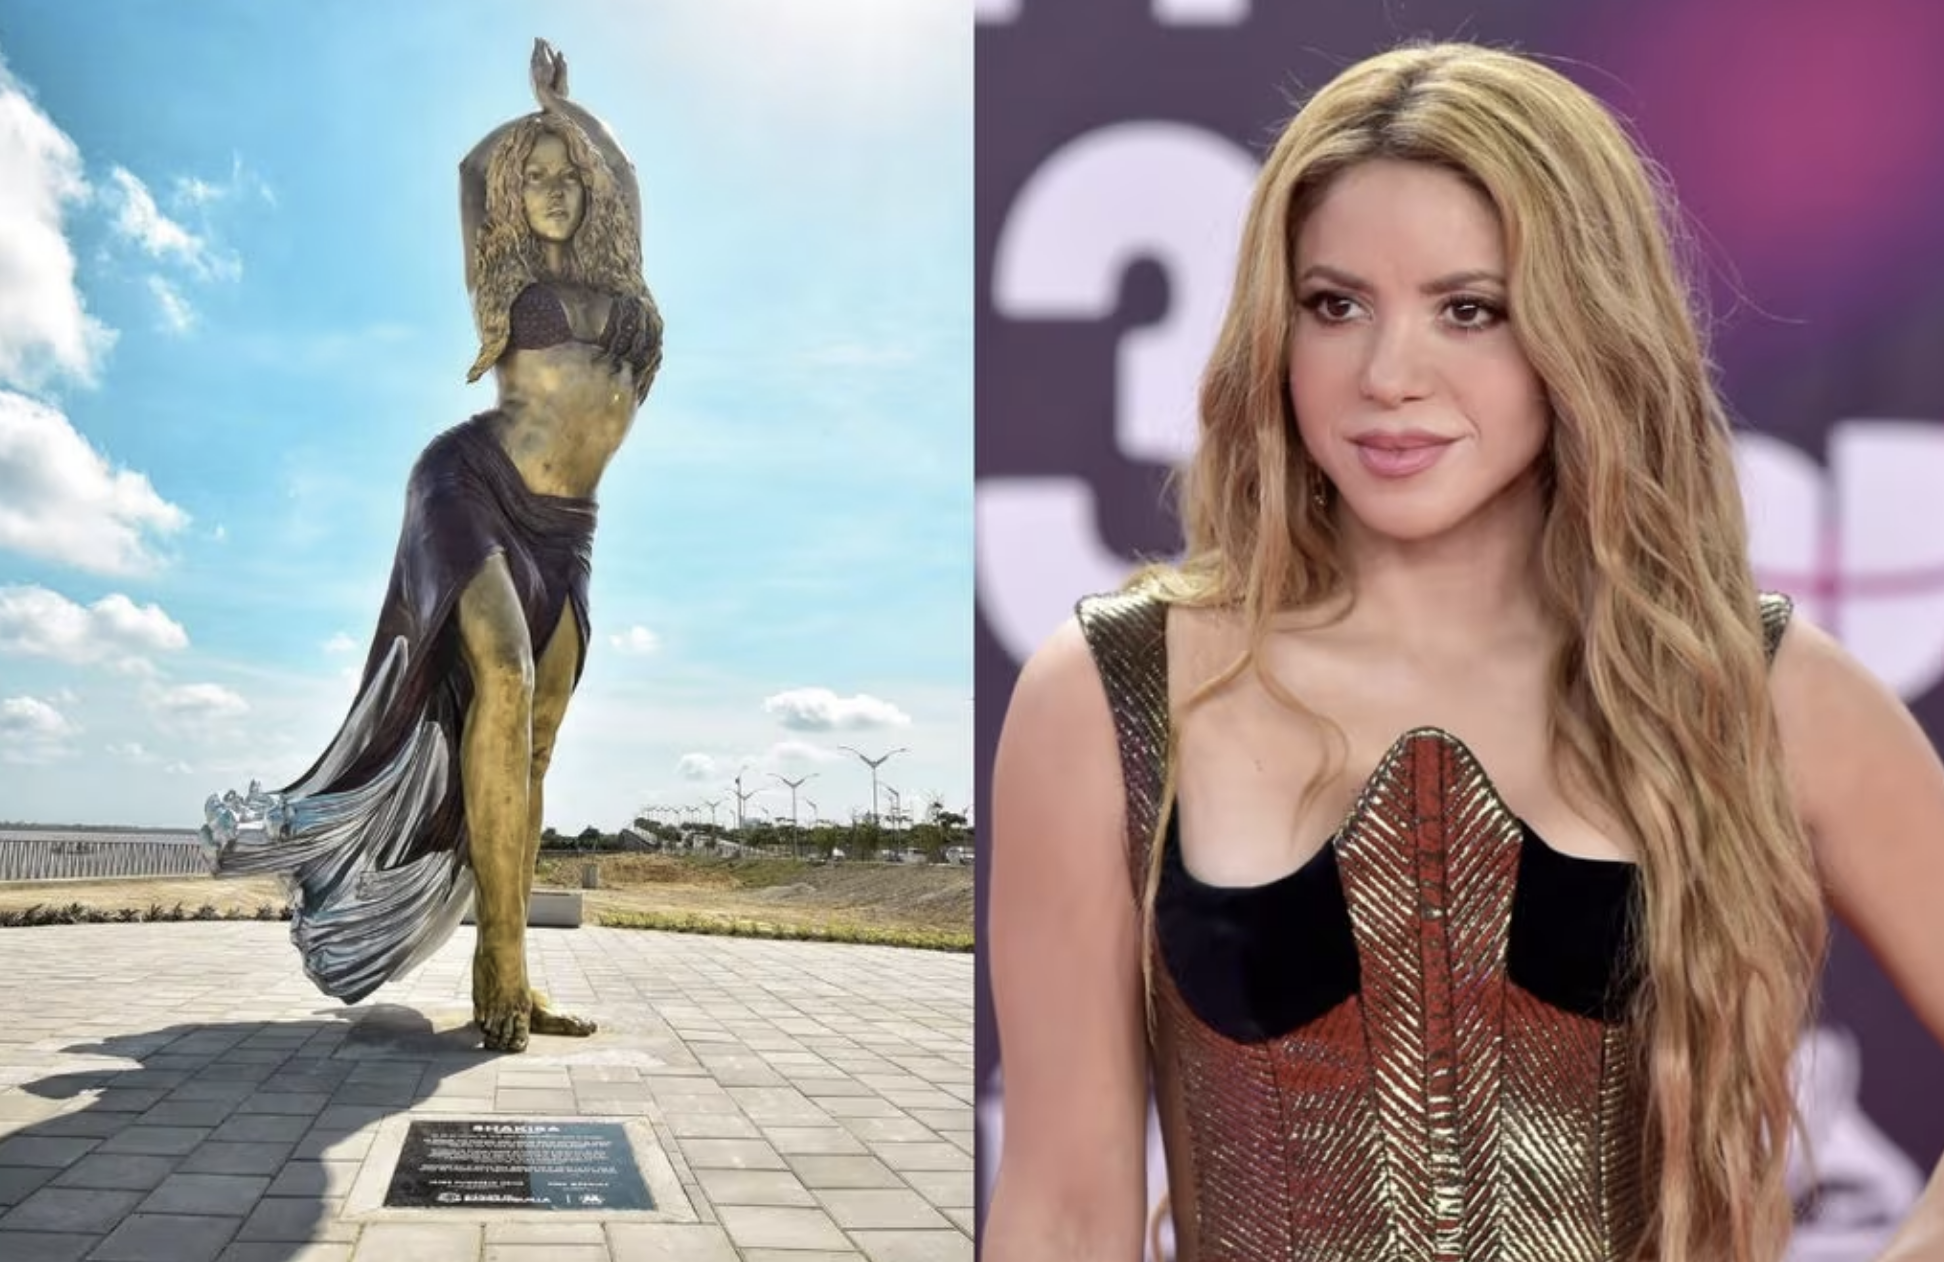 21-foot Shakira statue towers over singer’s hometown in Colombia